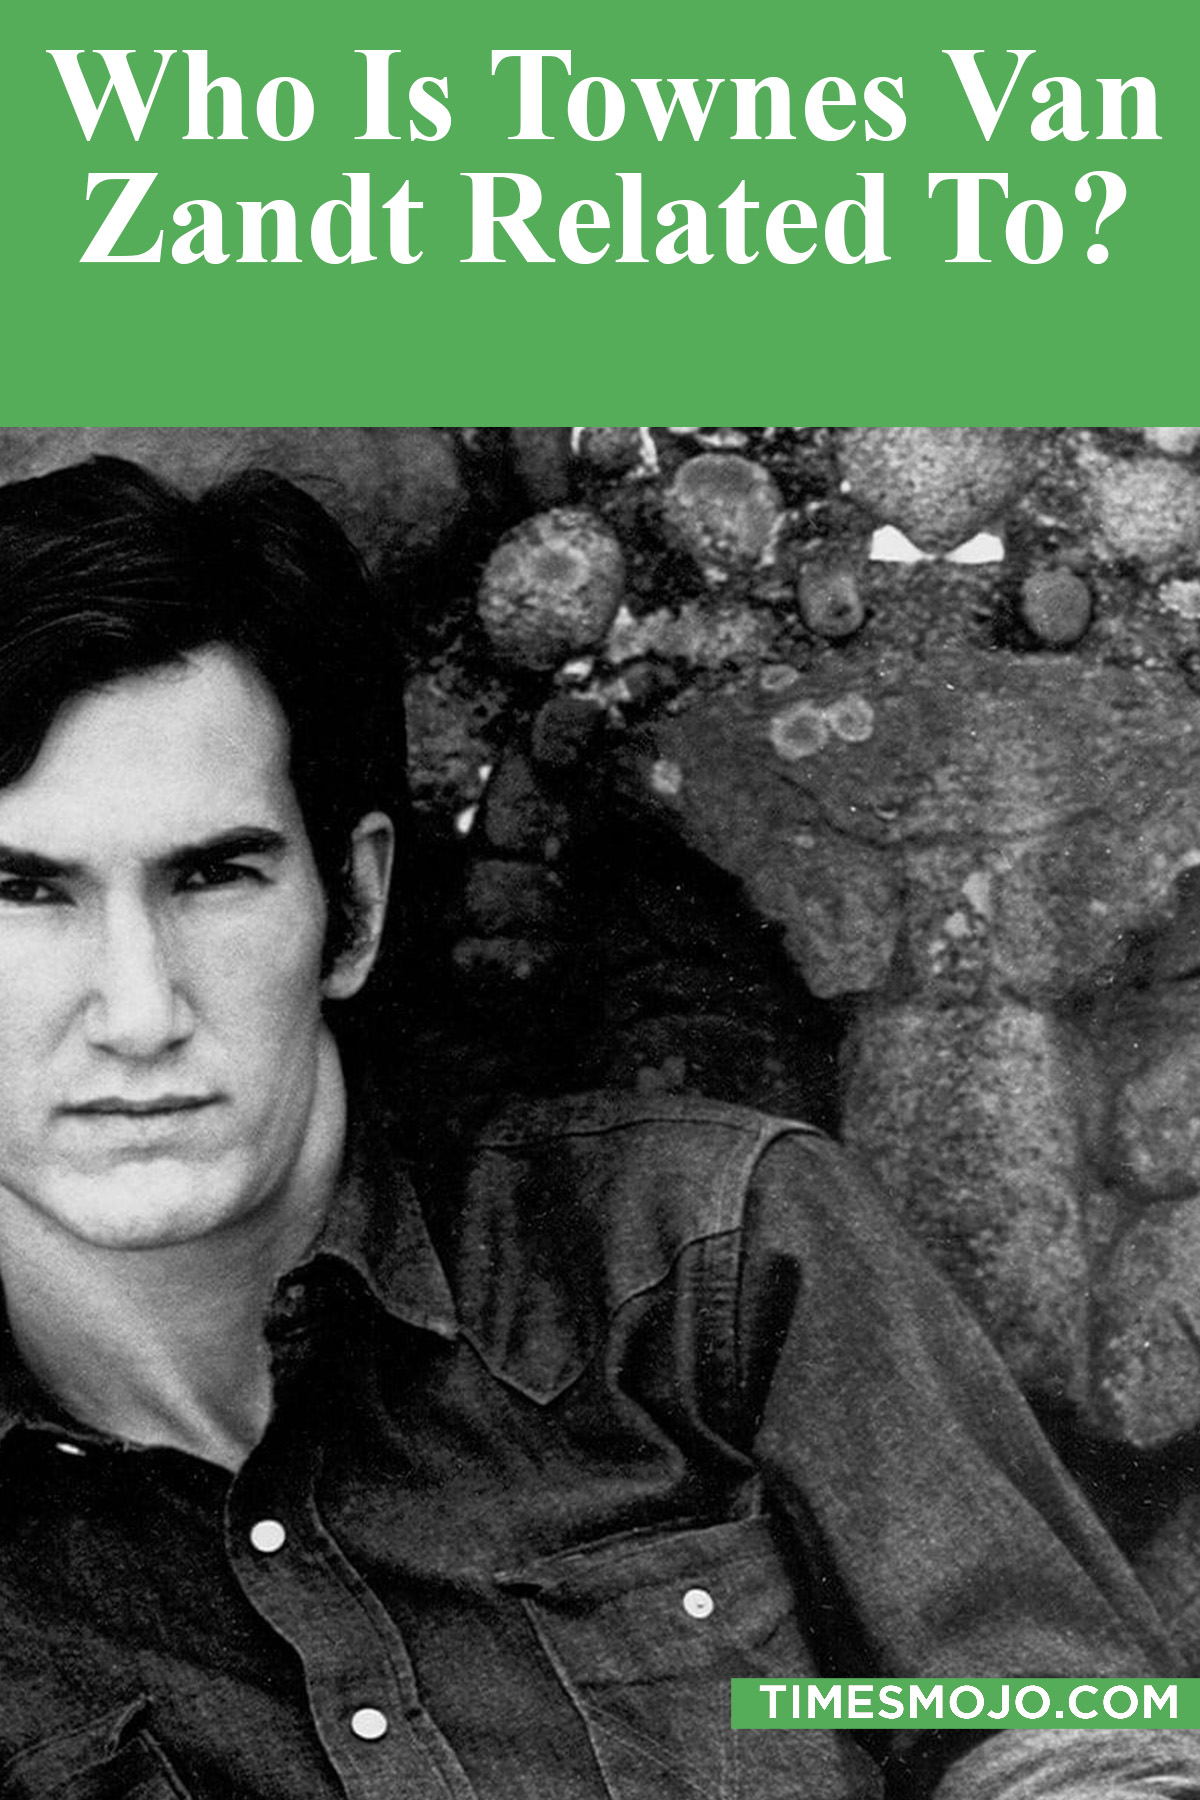 Who Is Townes Van Zandt Related To